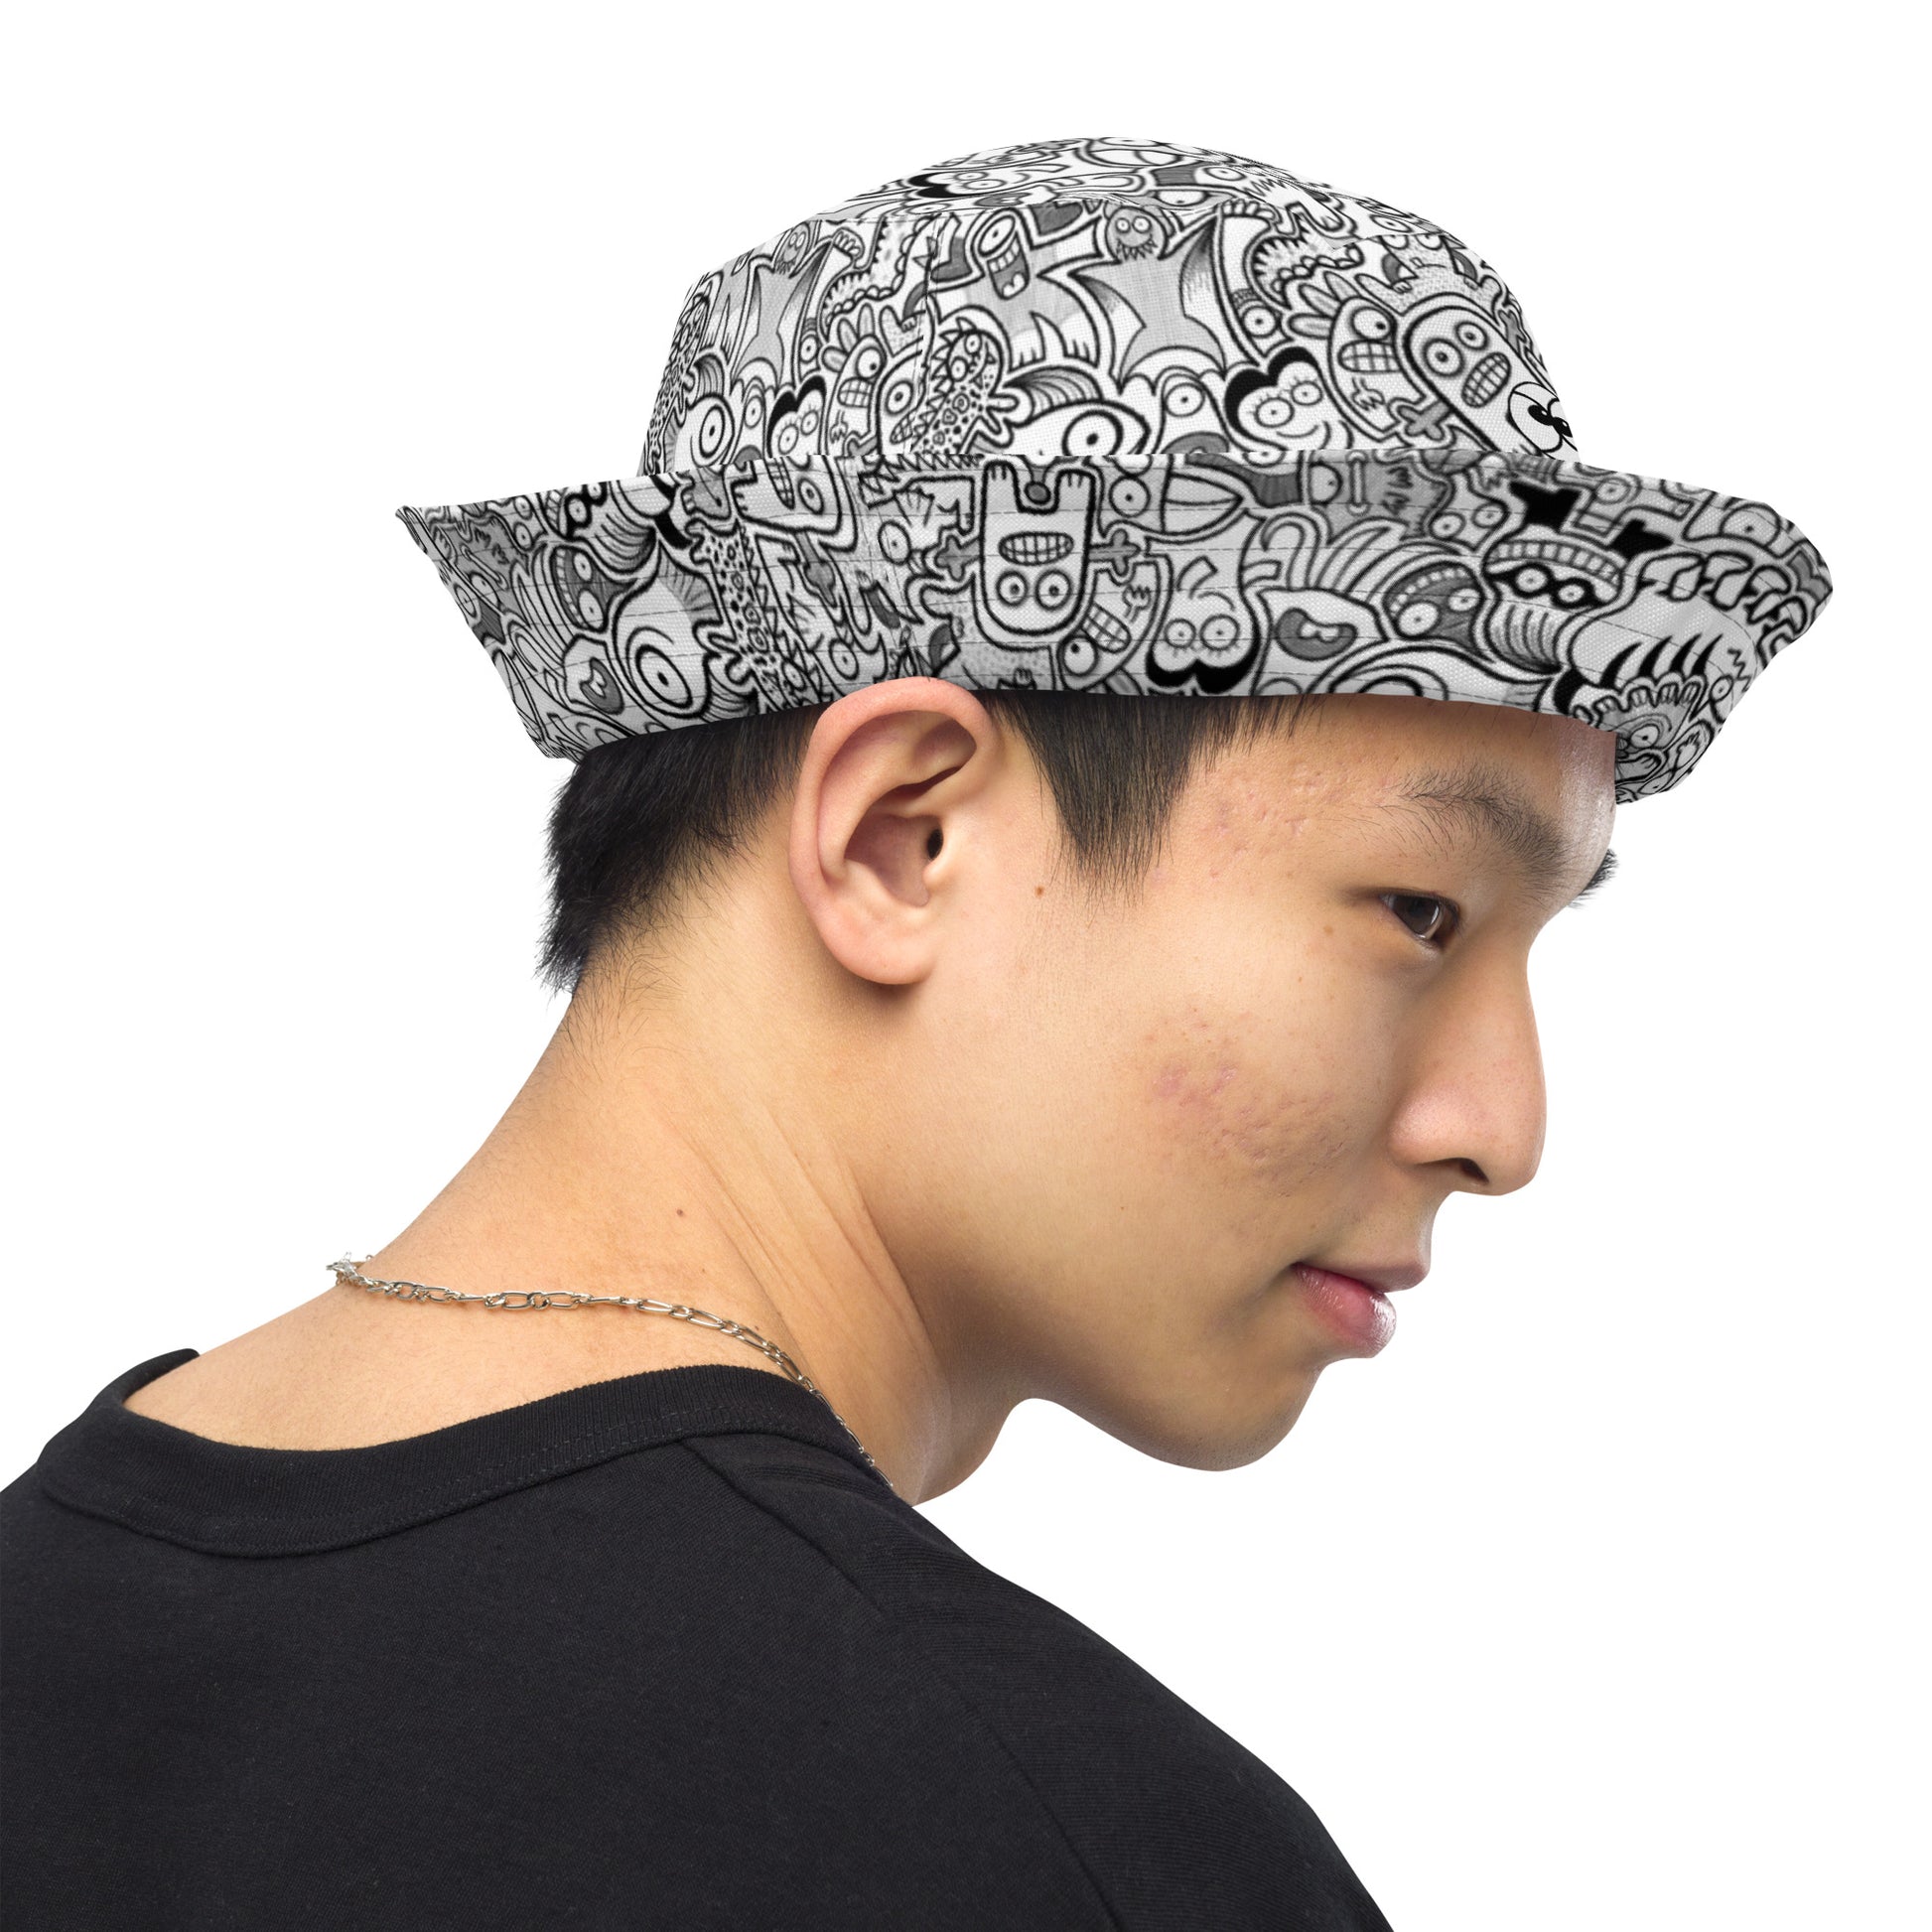 Fill your world with cool doodles Reversible bucket hat. Side view